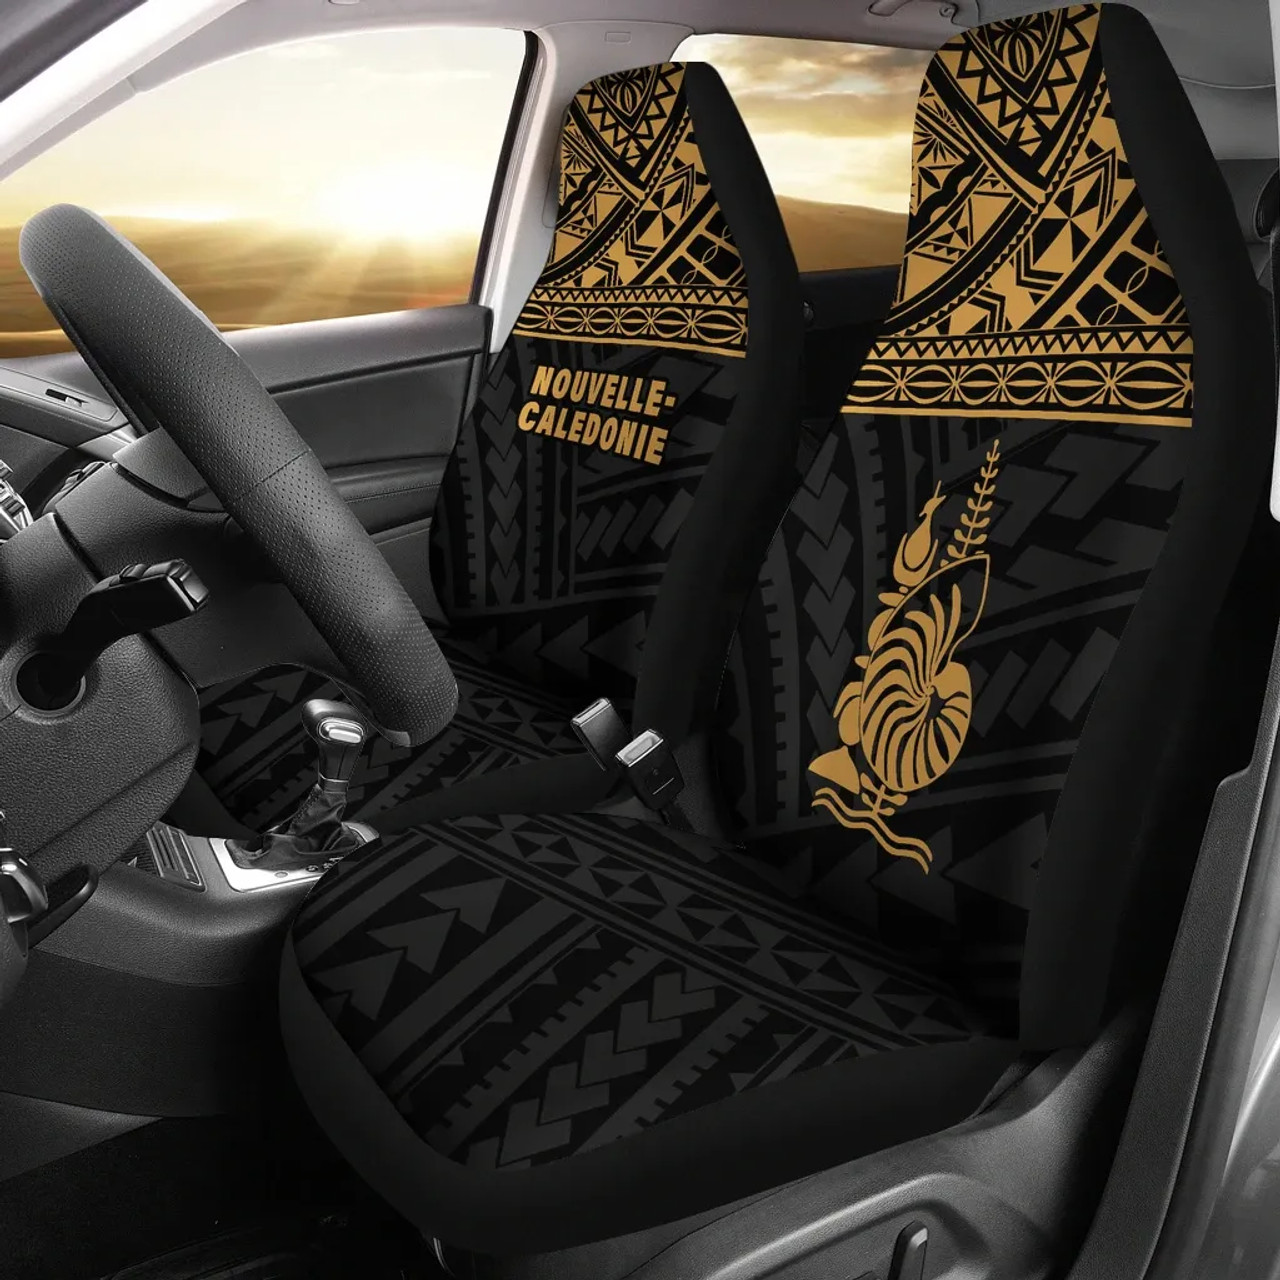 New Caledonia Car Seat Covers - New Caledonia Gold Coat Of Arms Polynesian Tattoo